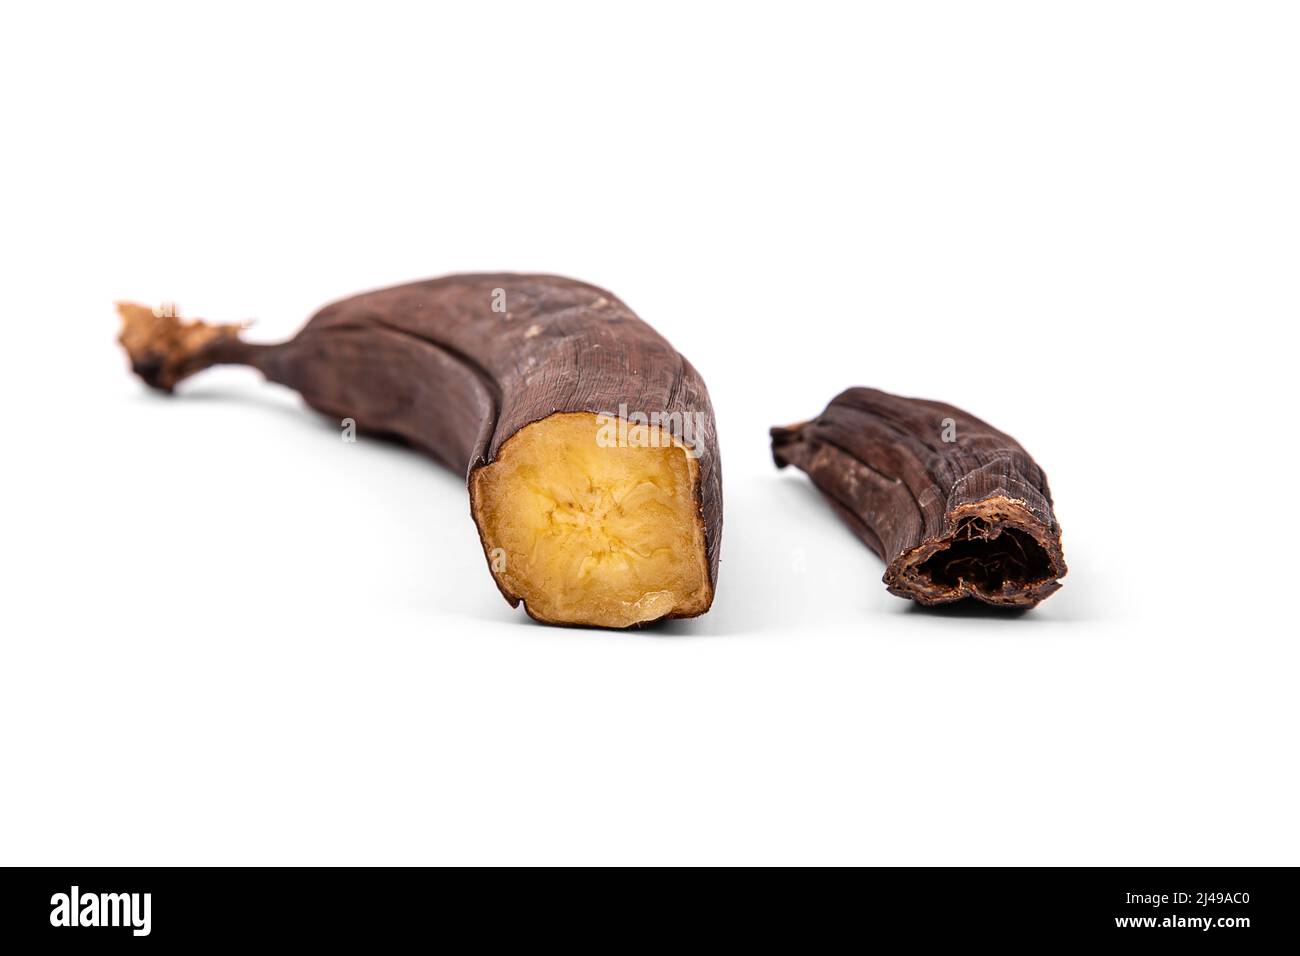 Overripe and dried bananas in section isolated on a white background Stock Photo